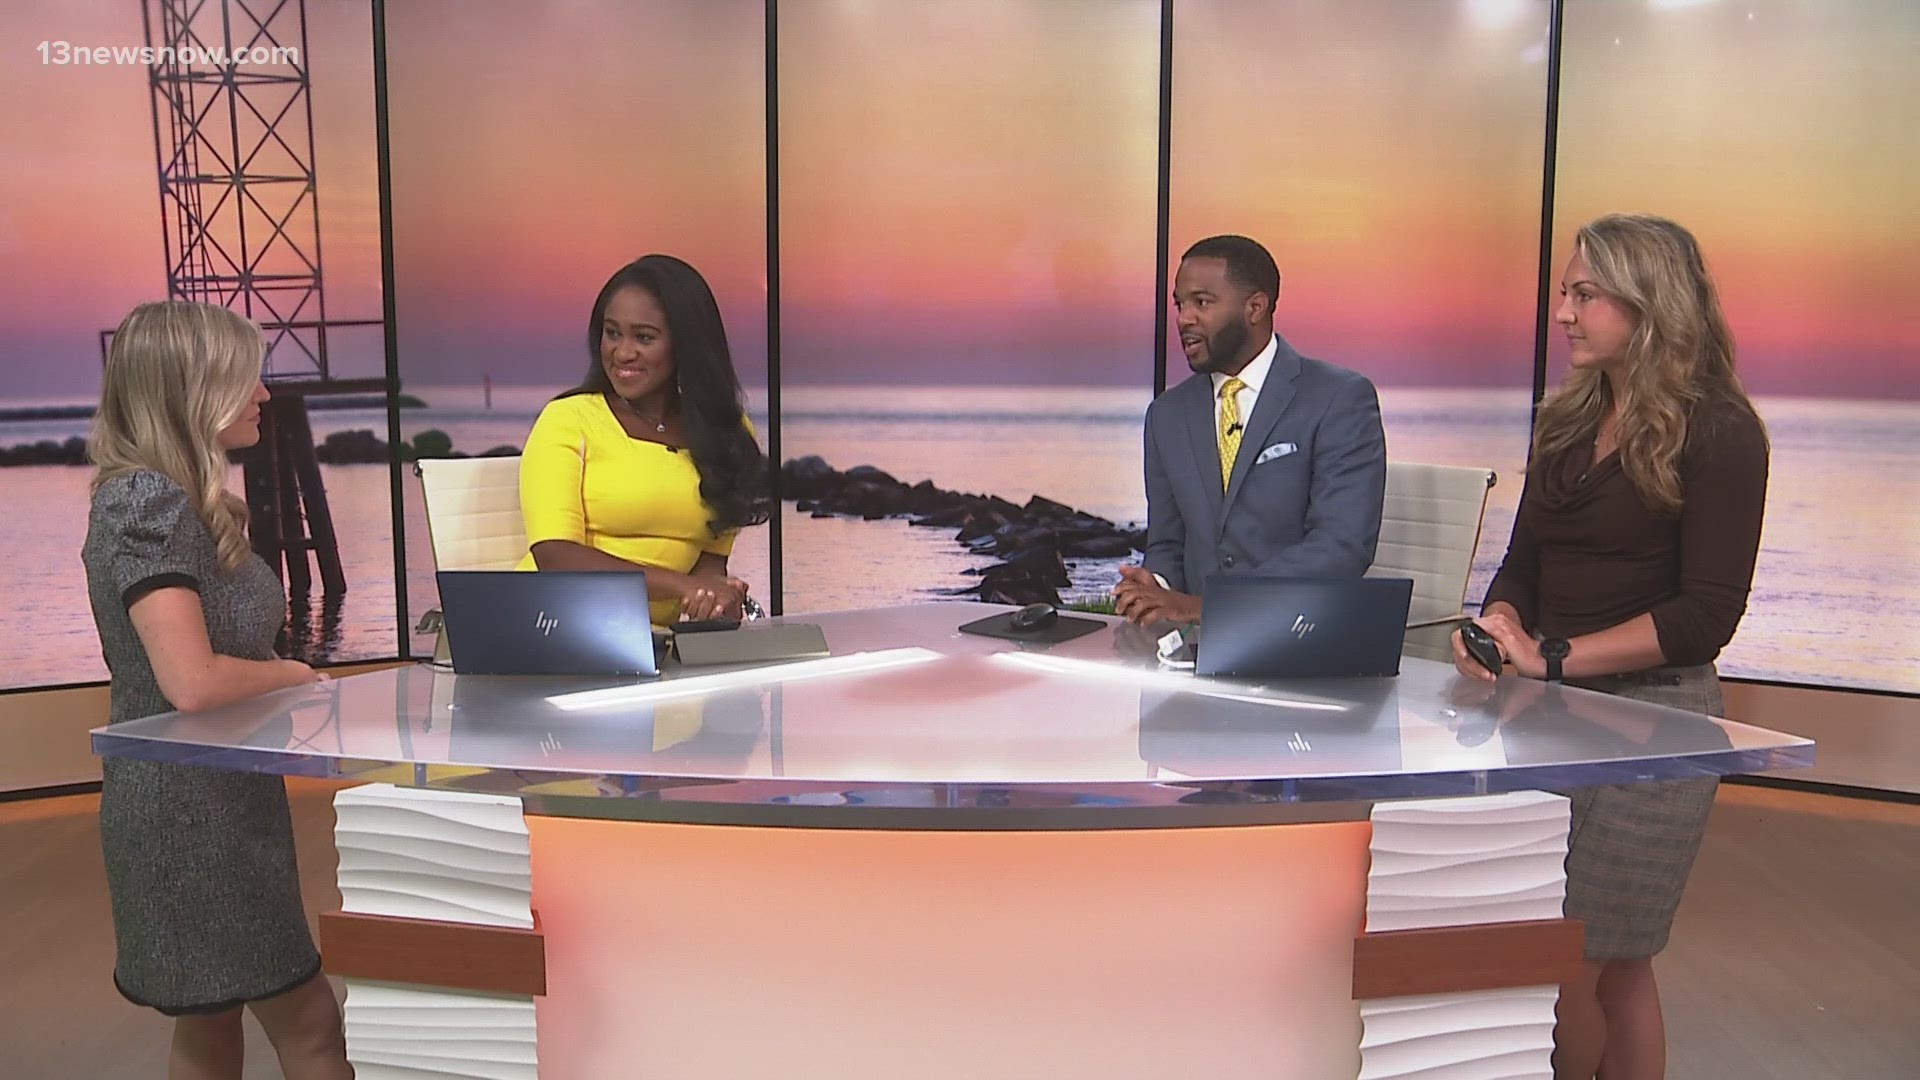 The 13News Now Daybreak Crew got together to bring you our best advice for a new school year.